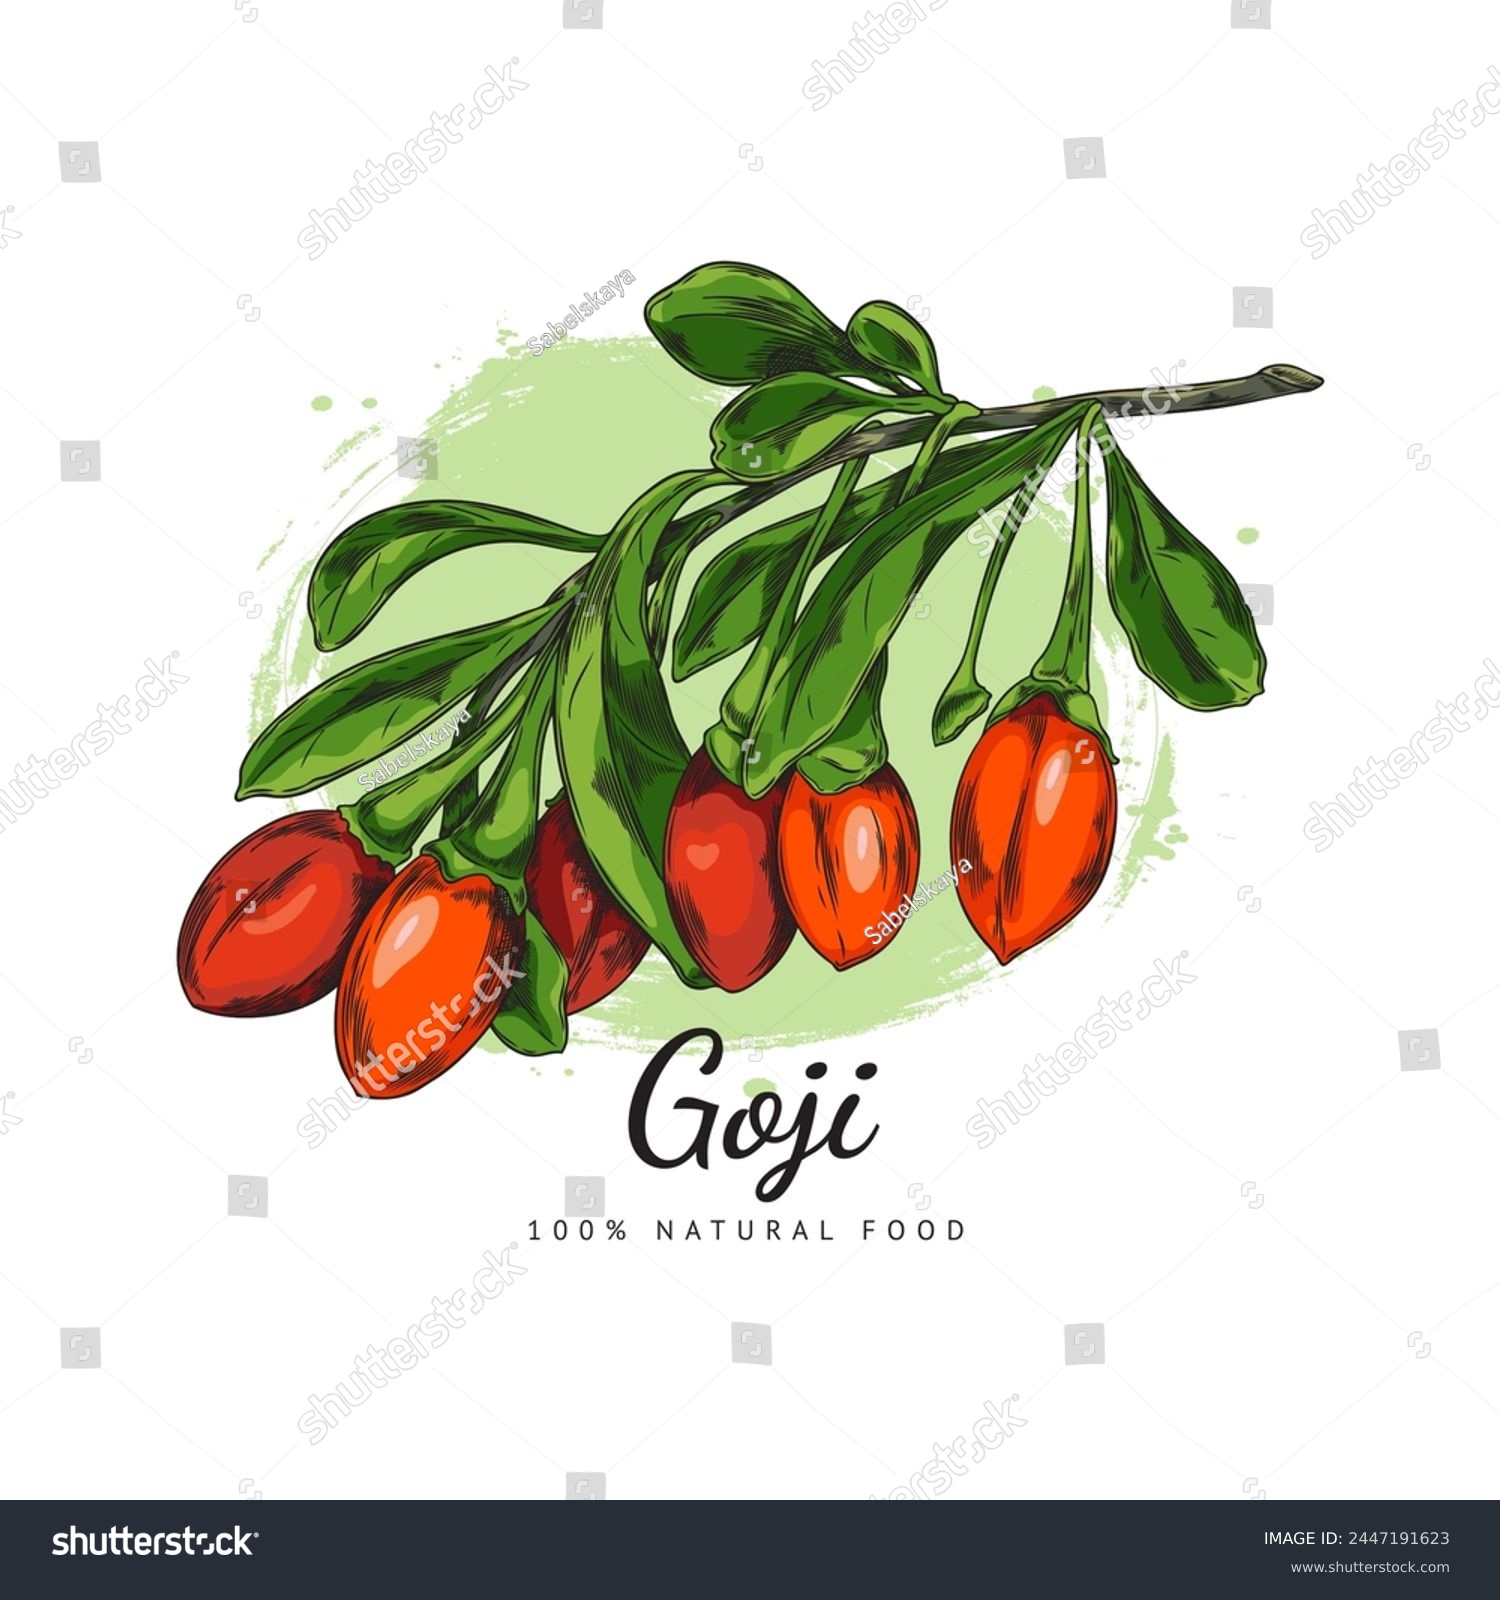 Fresh branch of goji berries with leaves hand drawn vector illustration. Natural ripe red berries sketch. Organic healthy superfood fruit plant on watercolor stain. Chinese wolfberry, lycium barbarum #2447191623